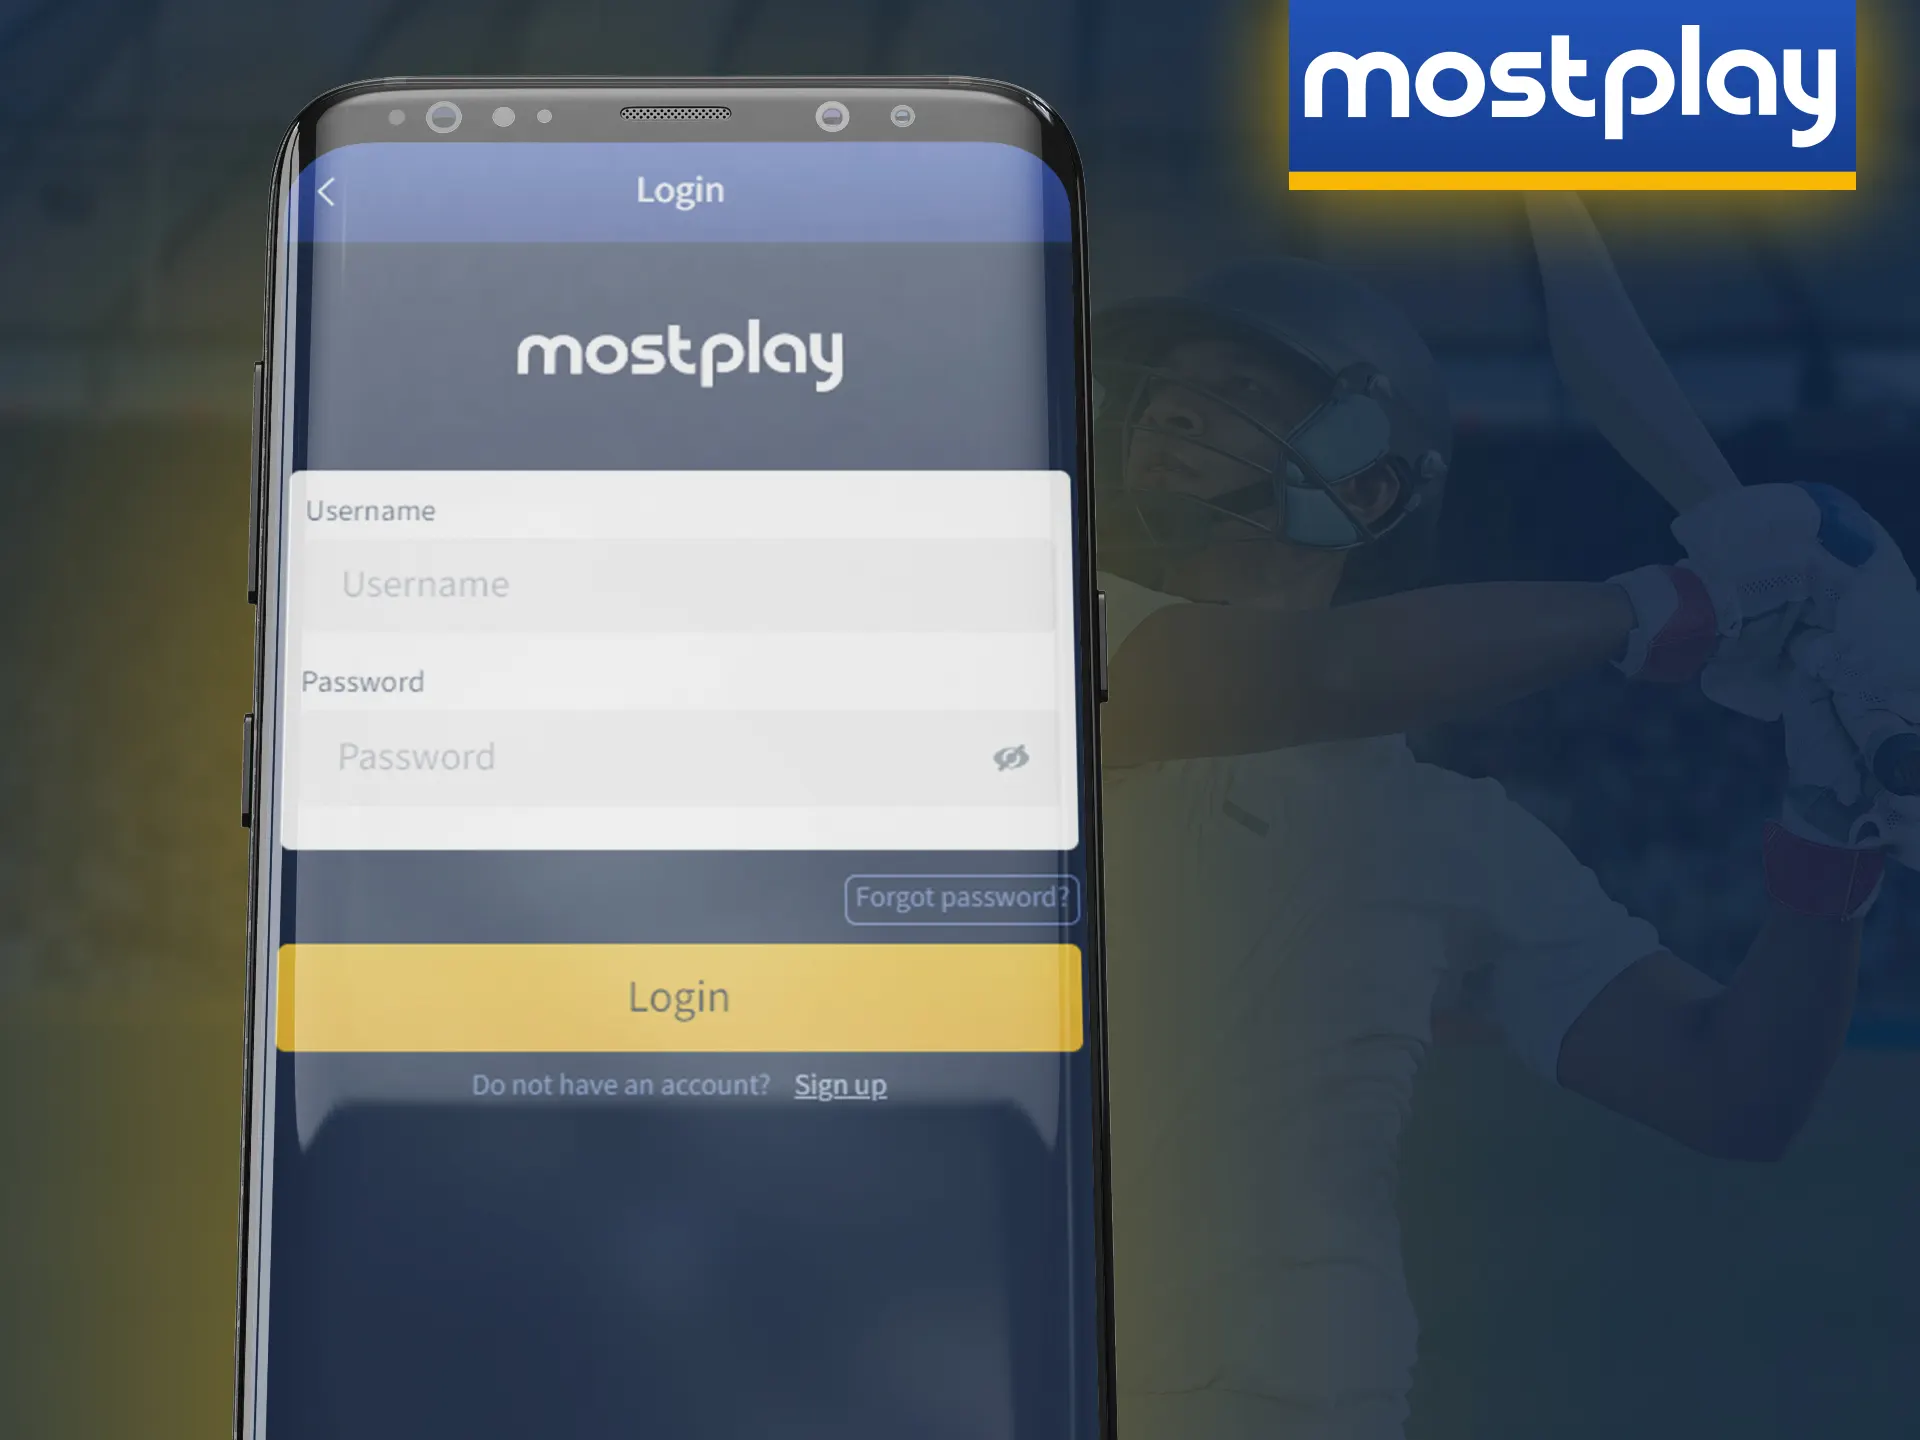 Enter your Mostplay account data for logging in.